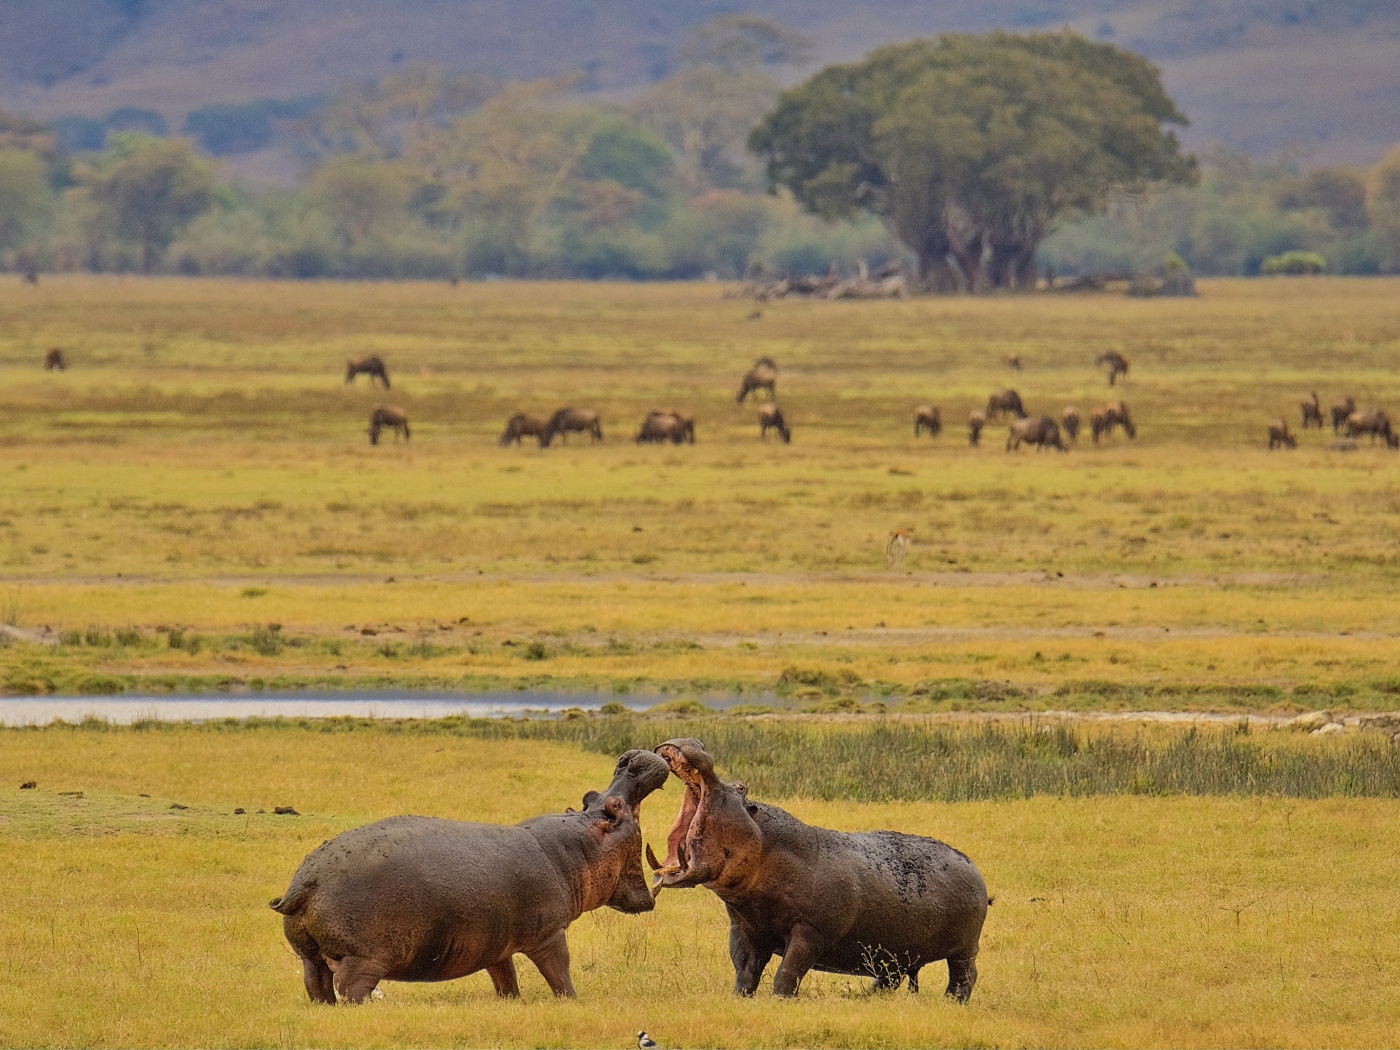 Two large hippos are fighting on the grass